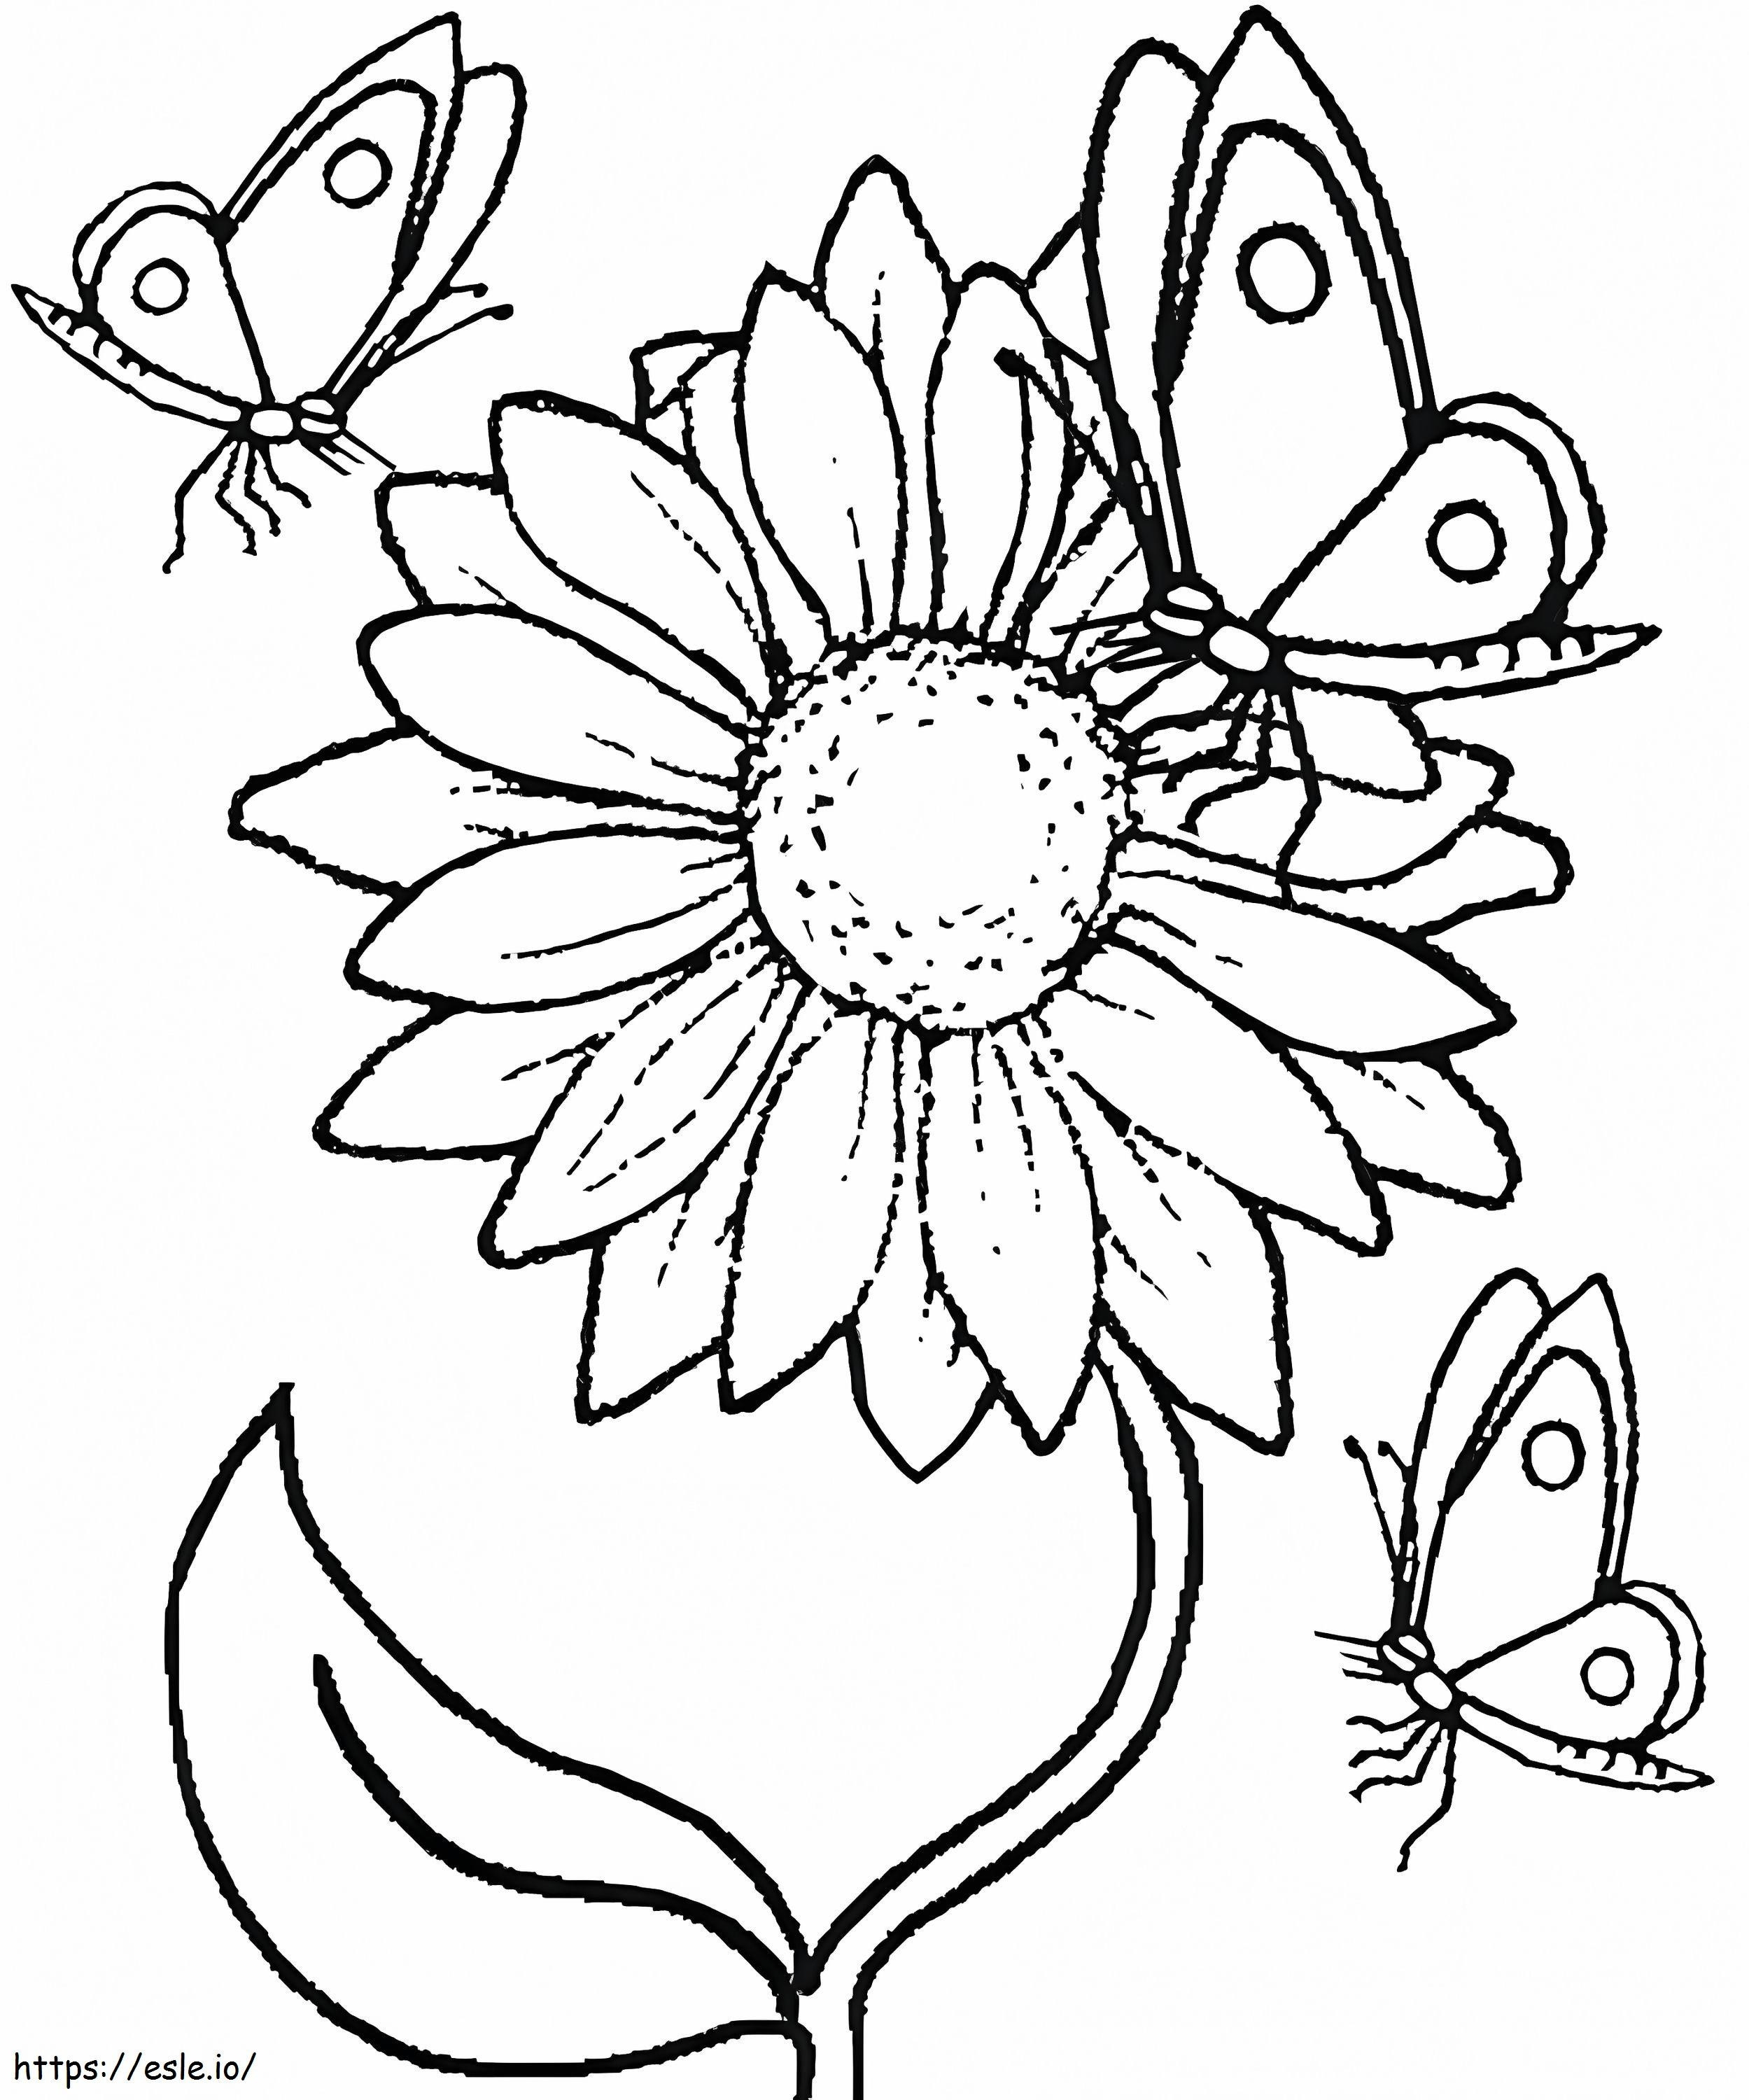 Sunflower And Butterflies coloring page